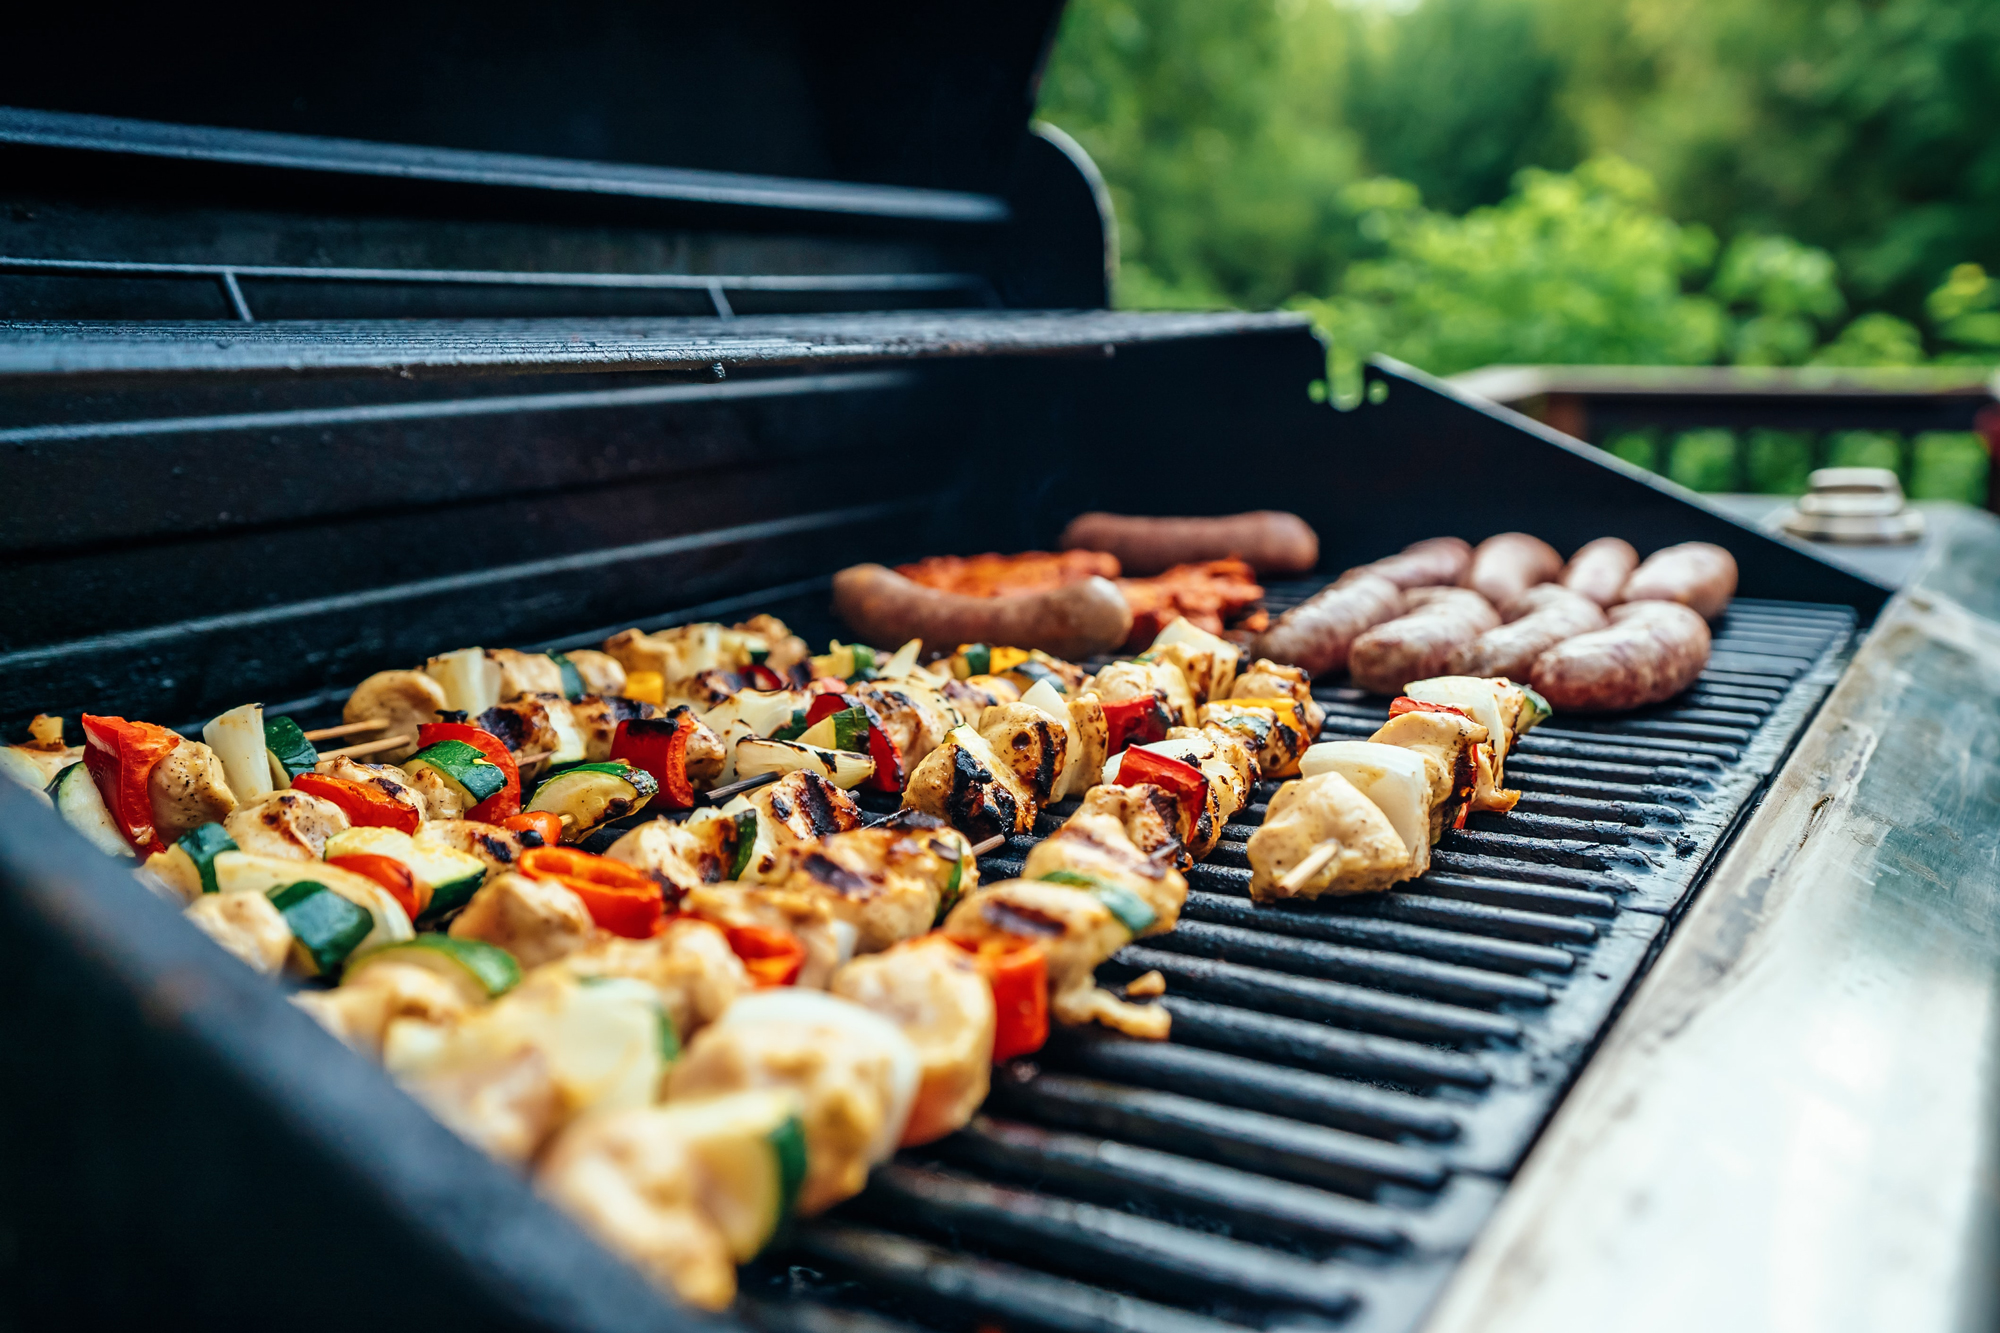 https://www.themanual.com/wp-content/uploads/sites/9/2020/04/grilling-top-with-veggies-and-meat-over-grill-unsplash.jpg?fit=2000%2C1333&p=1